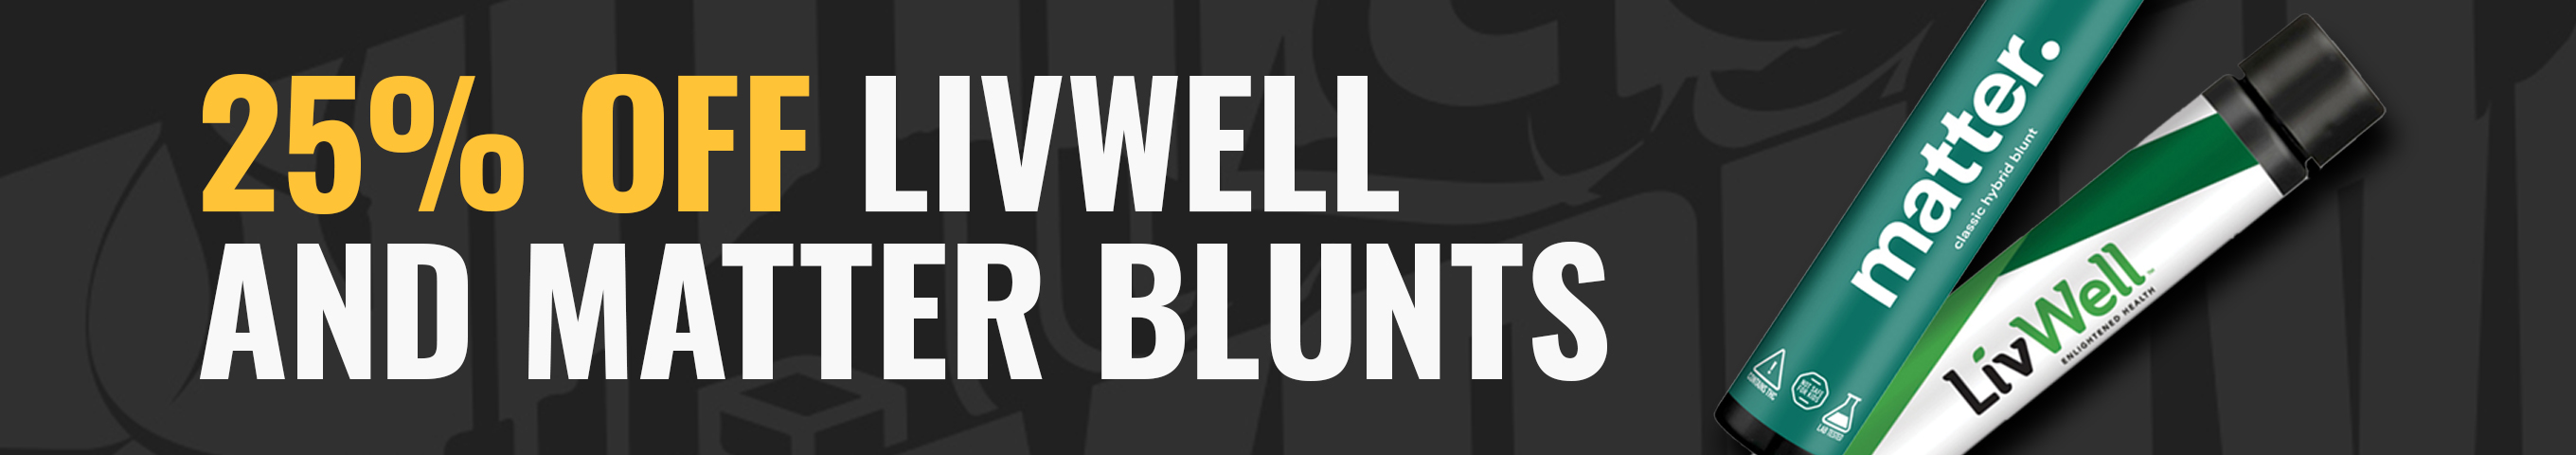 Cannabis Promo, Cannabis Sales, Cannabis Discounts, Cannabis on Sale, 25% Off Livwell and Matter Blunts 